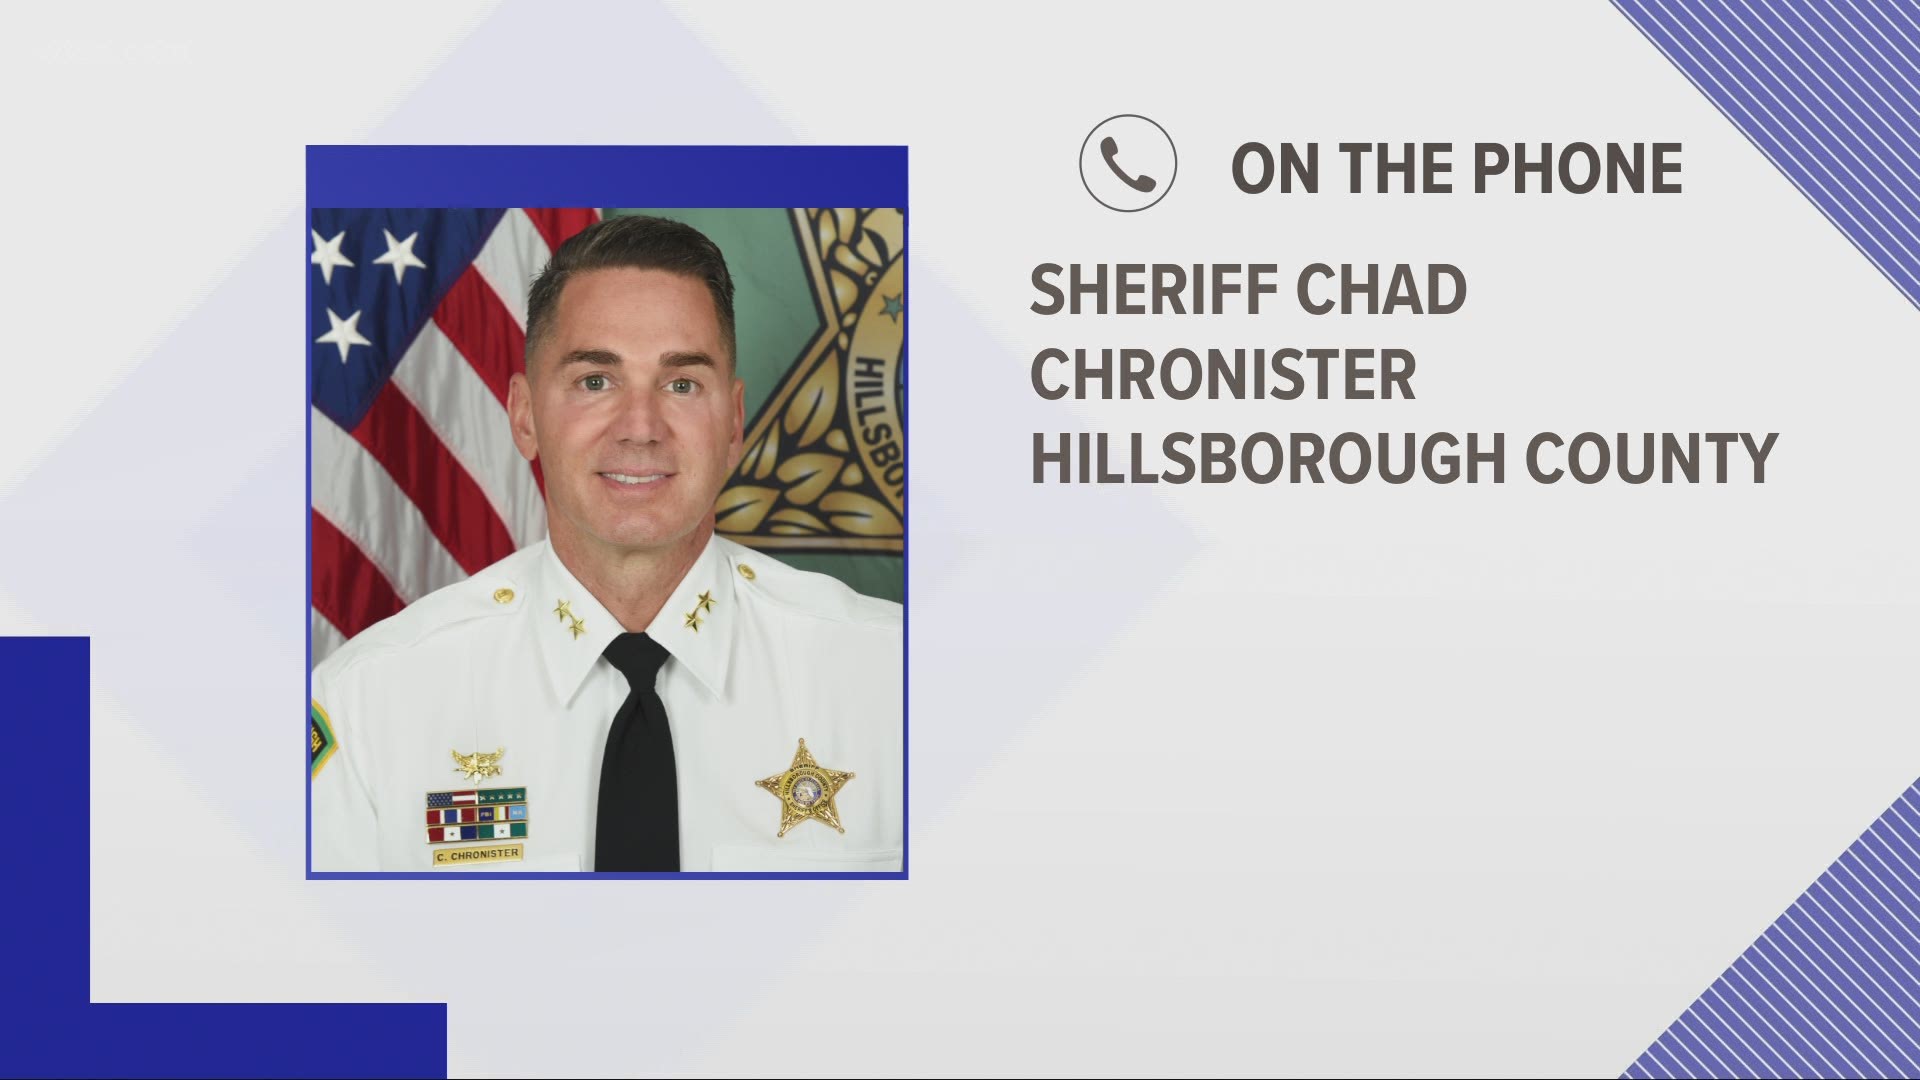 Hillsborough County Sheriff Chad Chronister said he opted not to implement a curfew for the remainder of the county because of the action of the very few.